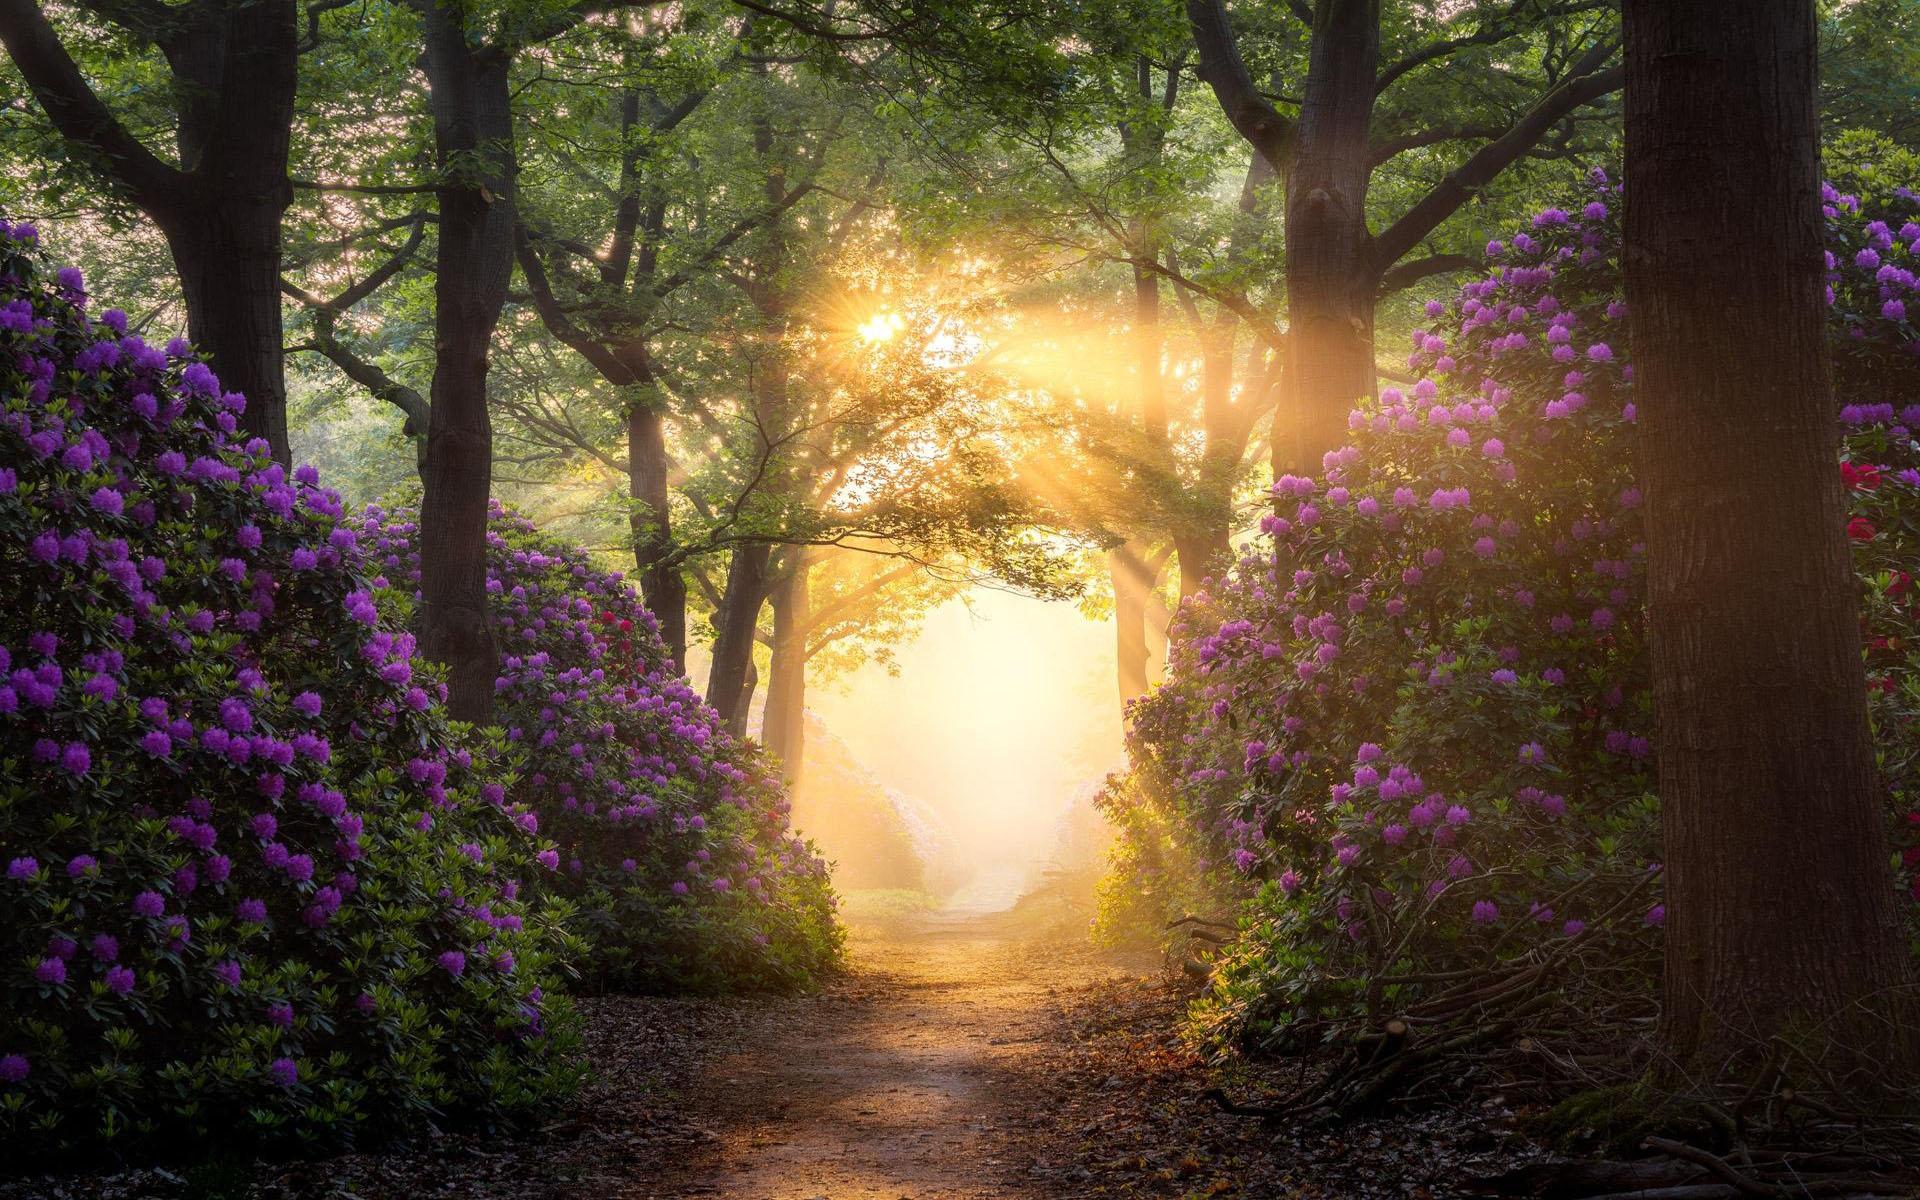 Magical rhododendron path in a forest in the Netherlands near Nijverdal [1920x1200]